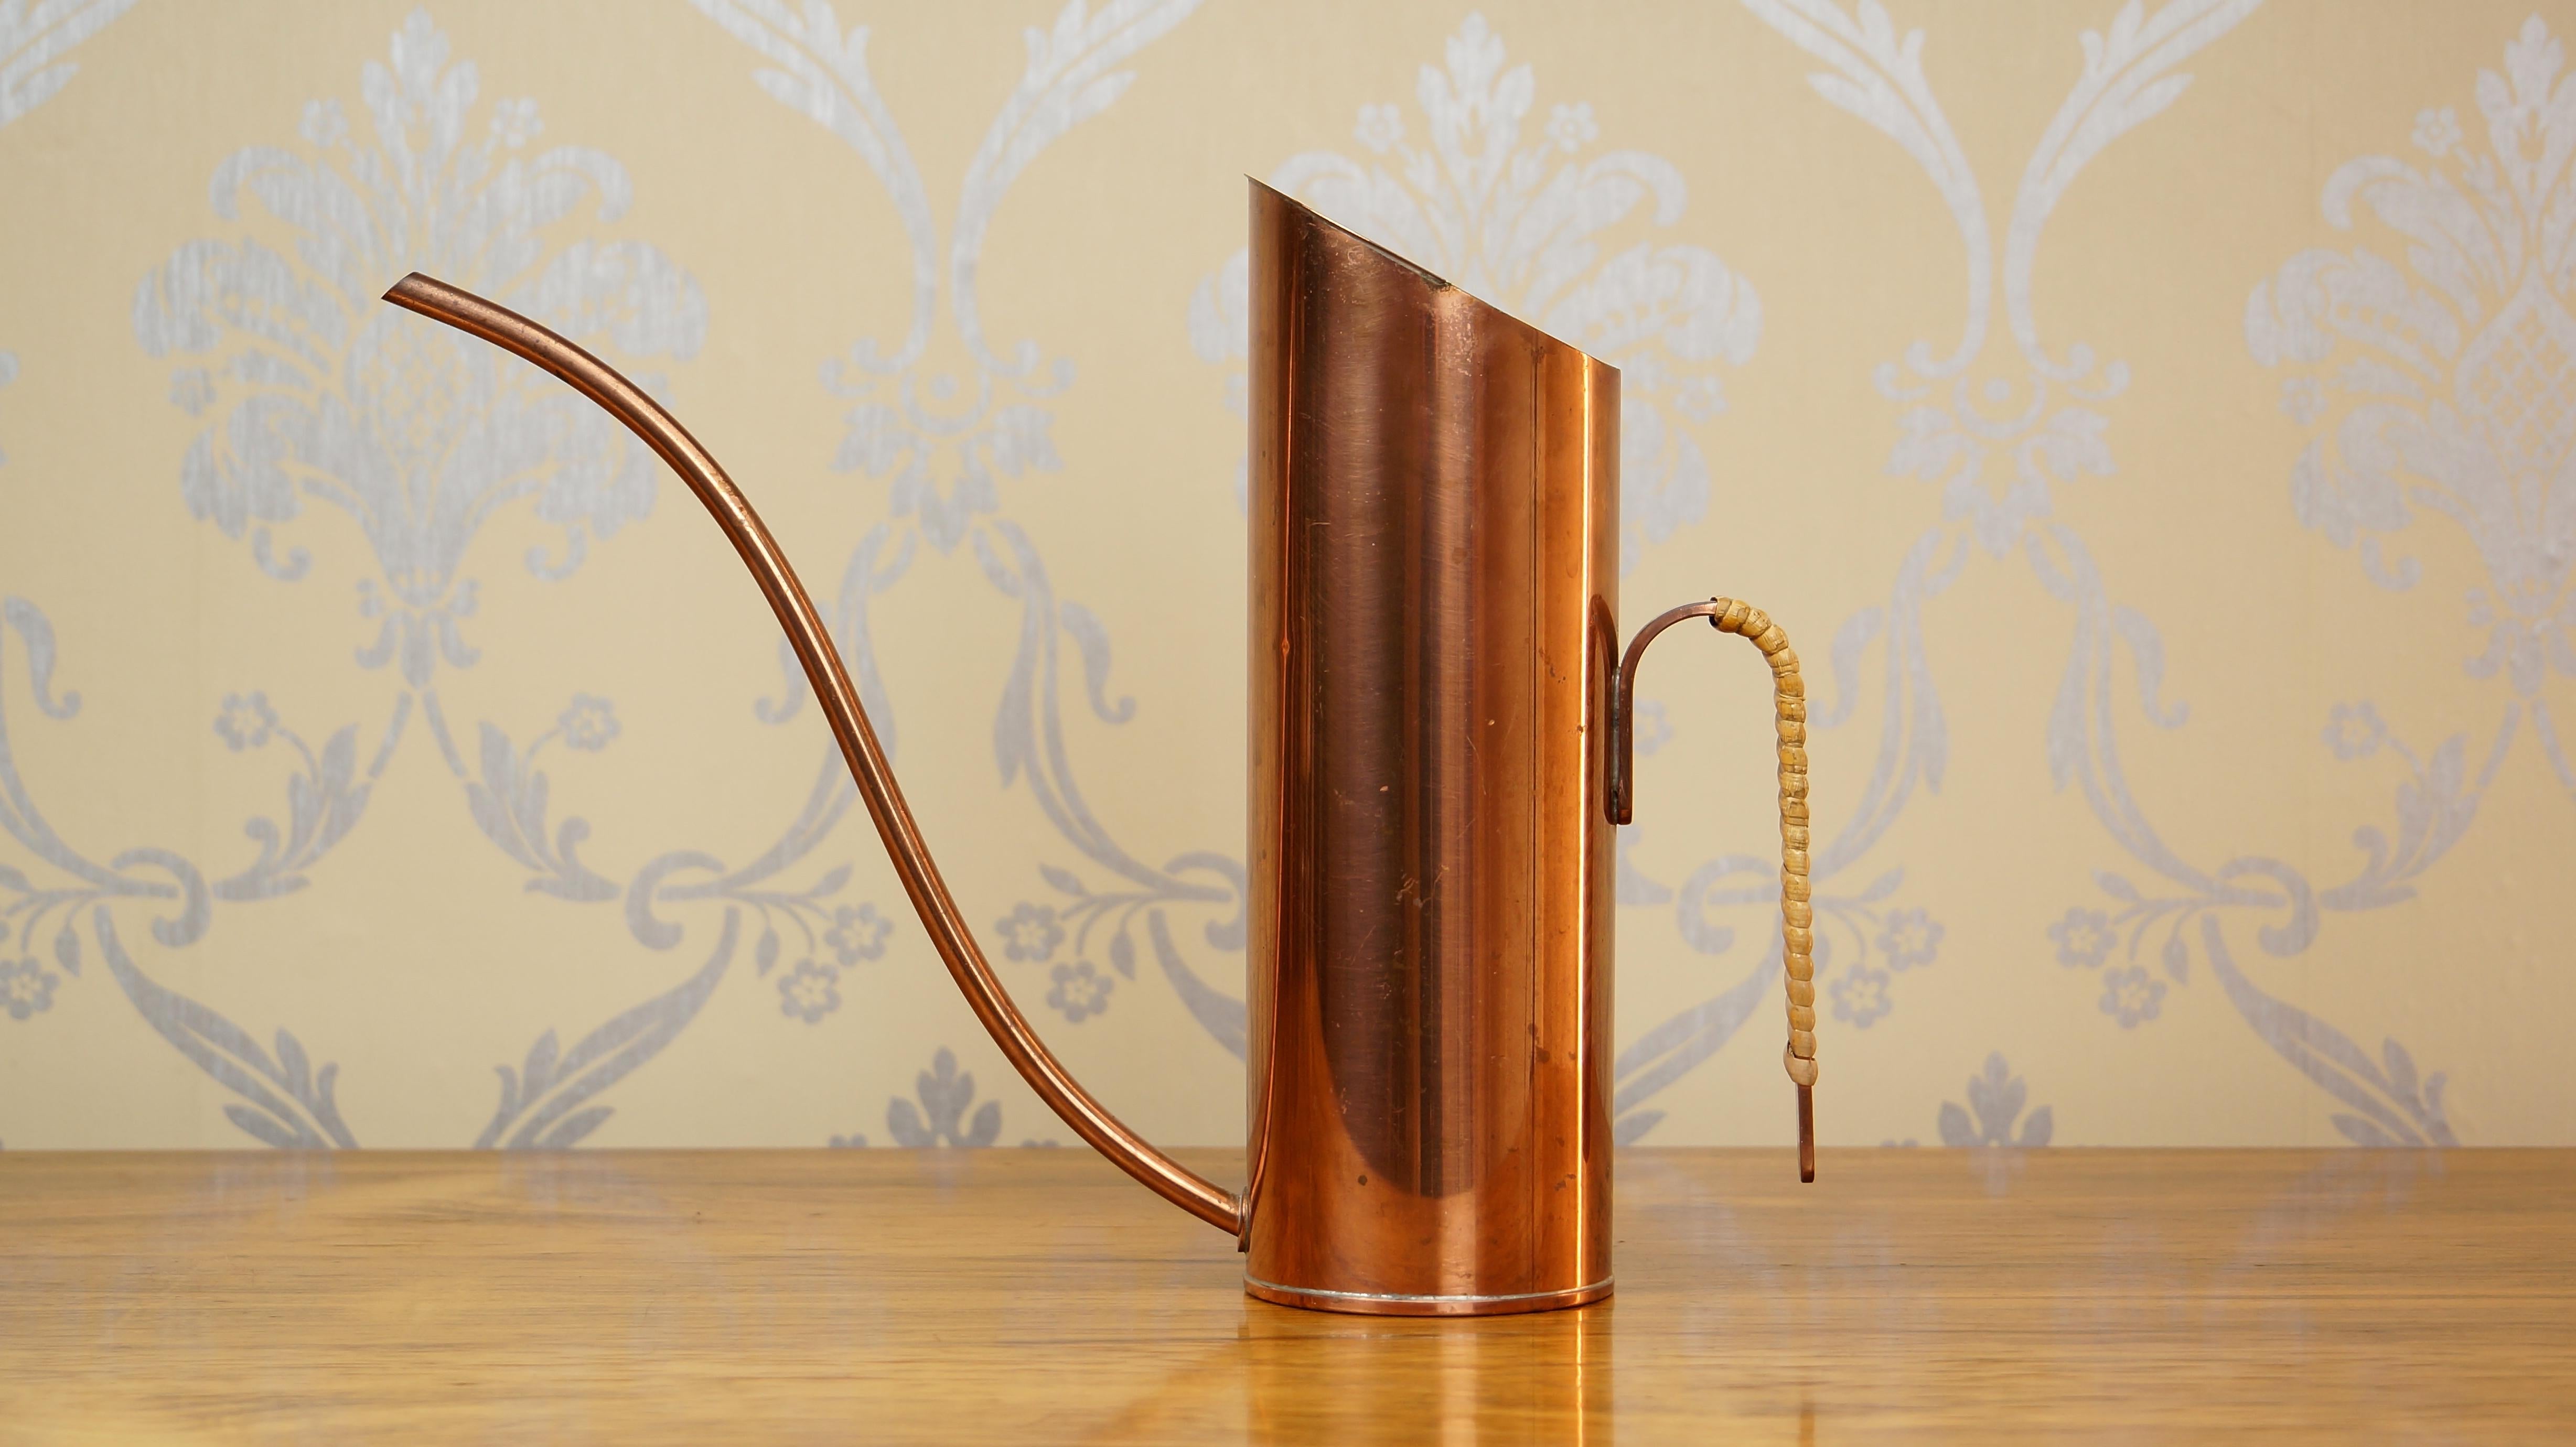 An elegant copper watering can or pitcher designed by Gunnar Ander for Ystad Metall, Sweden in the 1950s. 

It features a sculptural spout and striking lines. The beautiful woven rattan handle adds texture to the piece. It is stamped on the